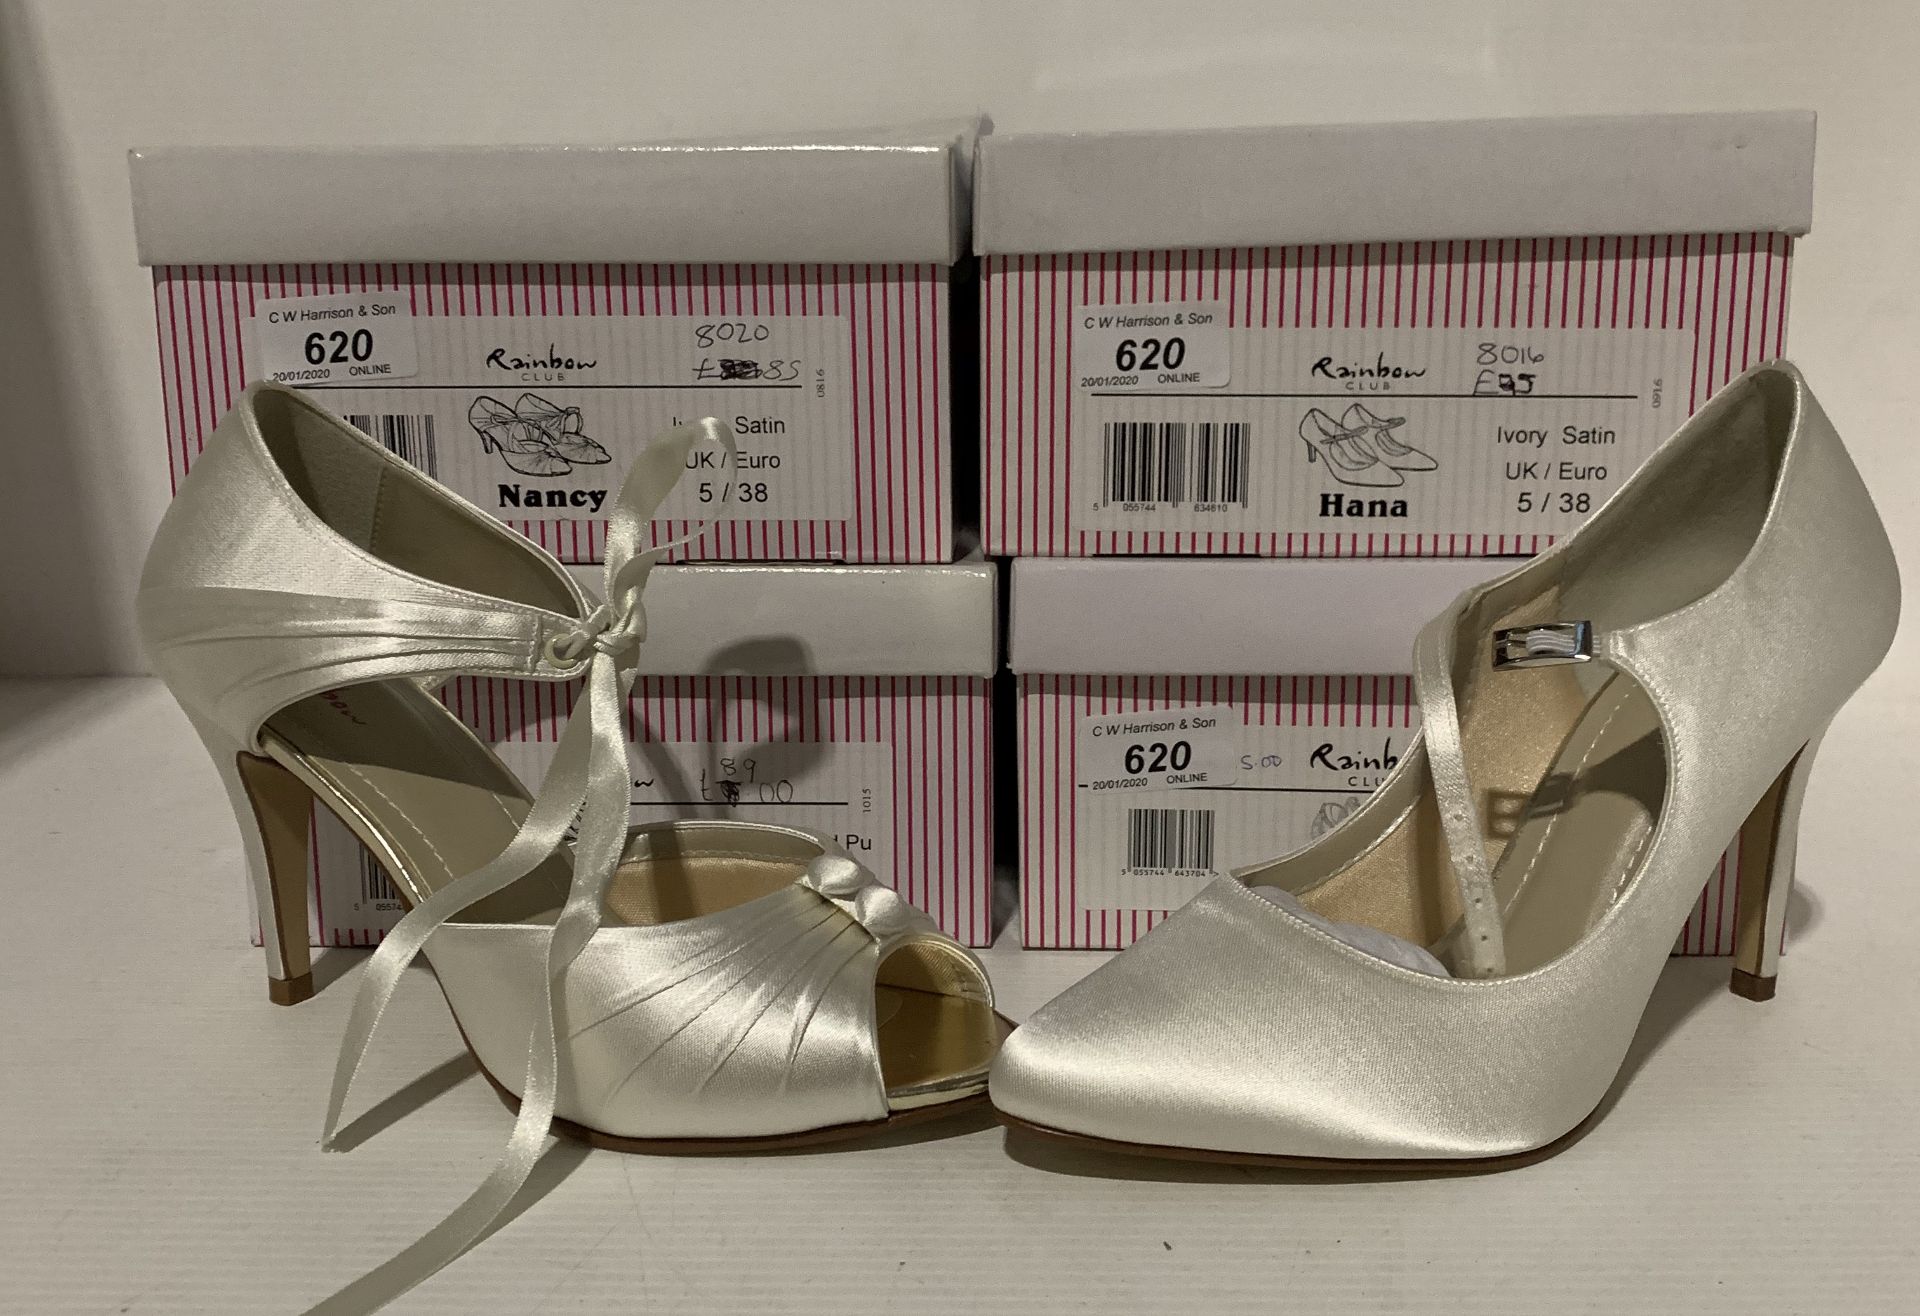 4 x pairs of bridal shoes by Rainbow Club - size 5/38